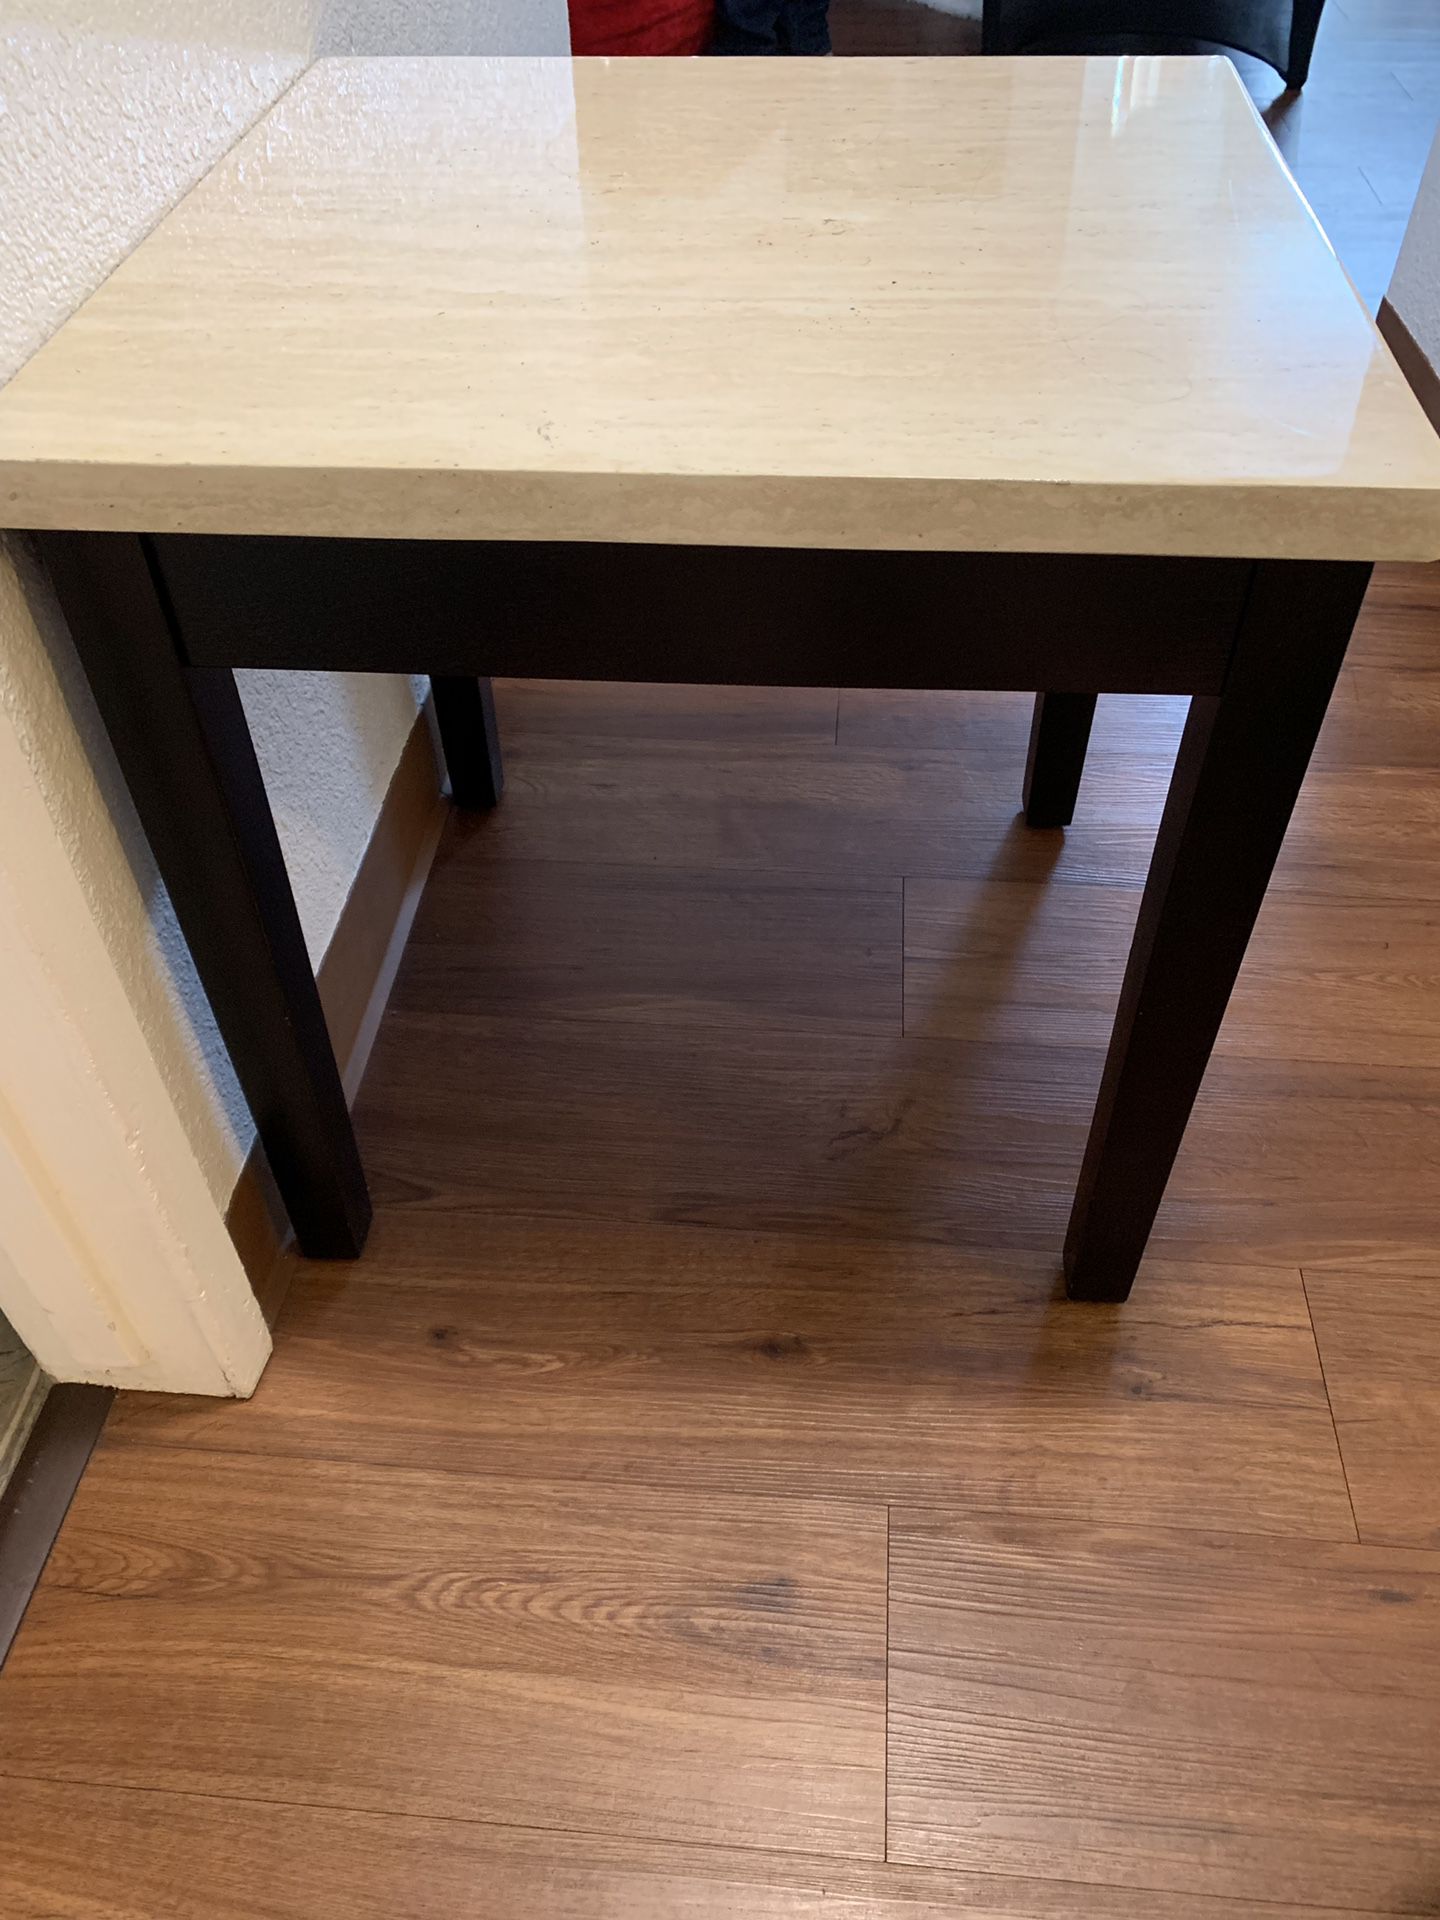 Square end table and rectangle living room table